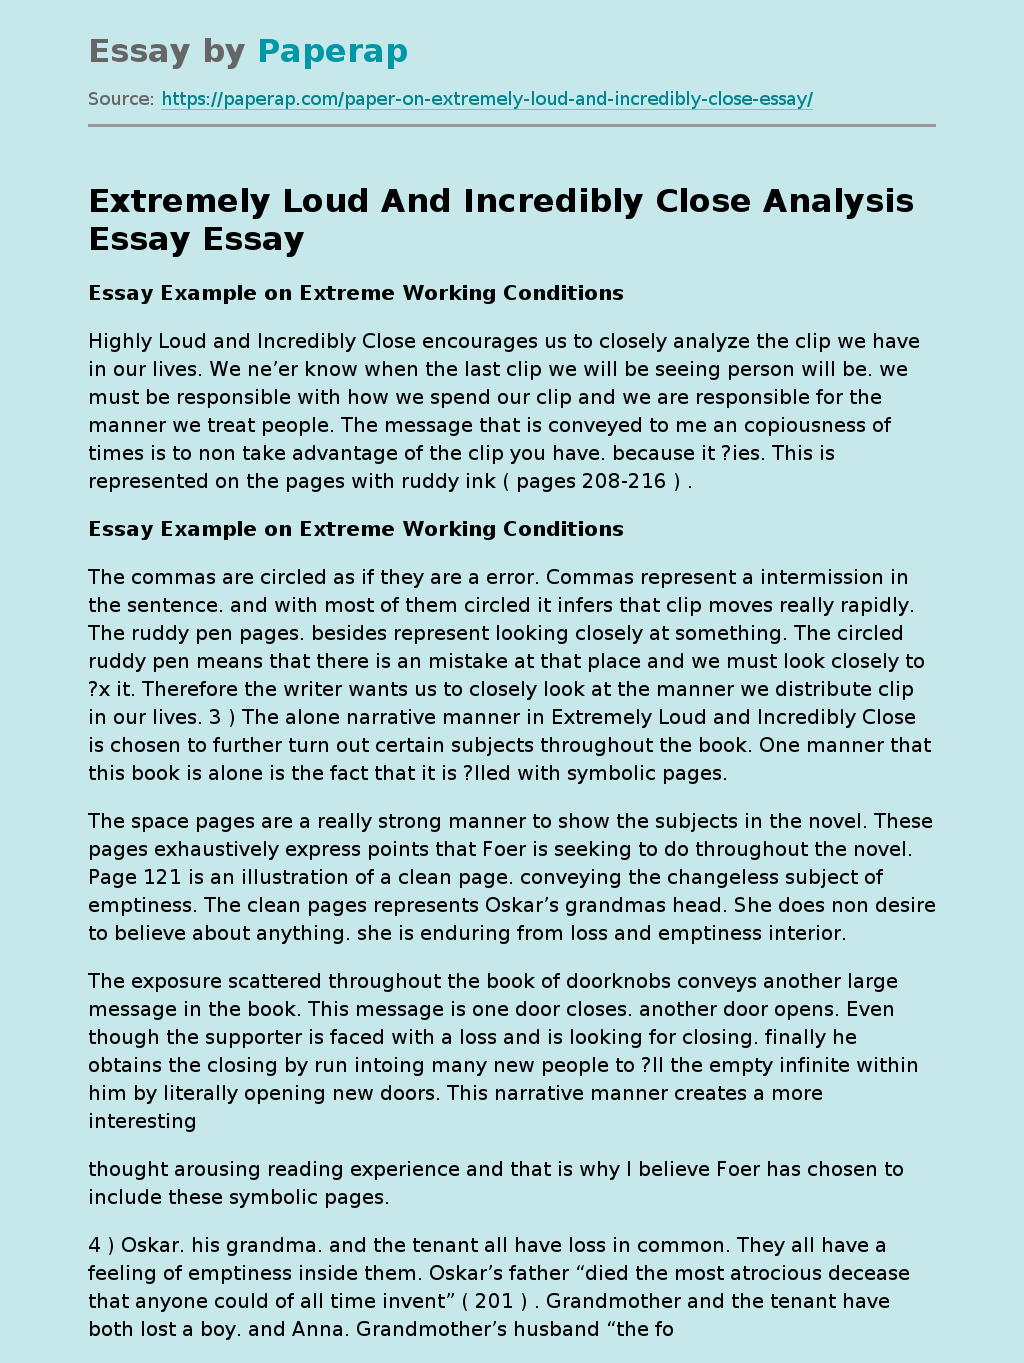 Extremely Loud And Incredibly Close Analysis Essay